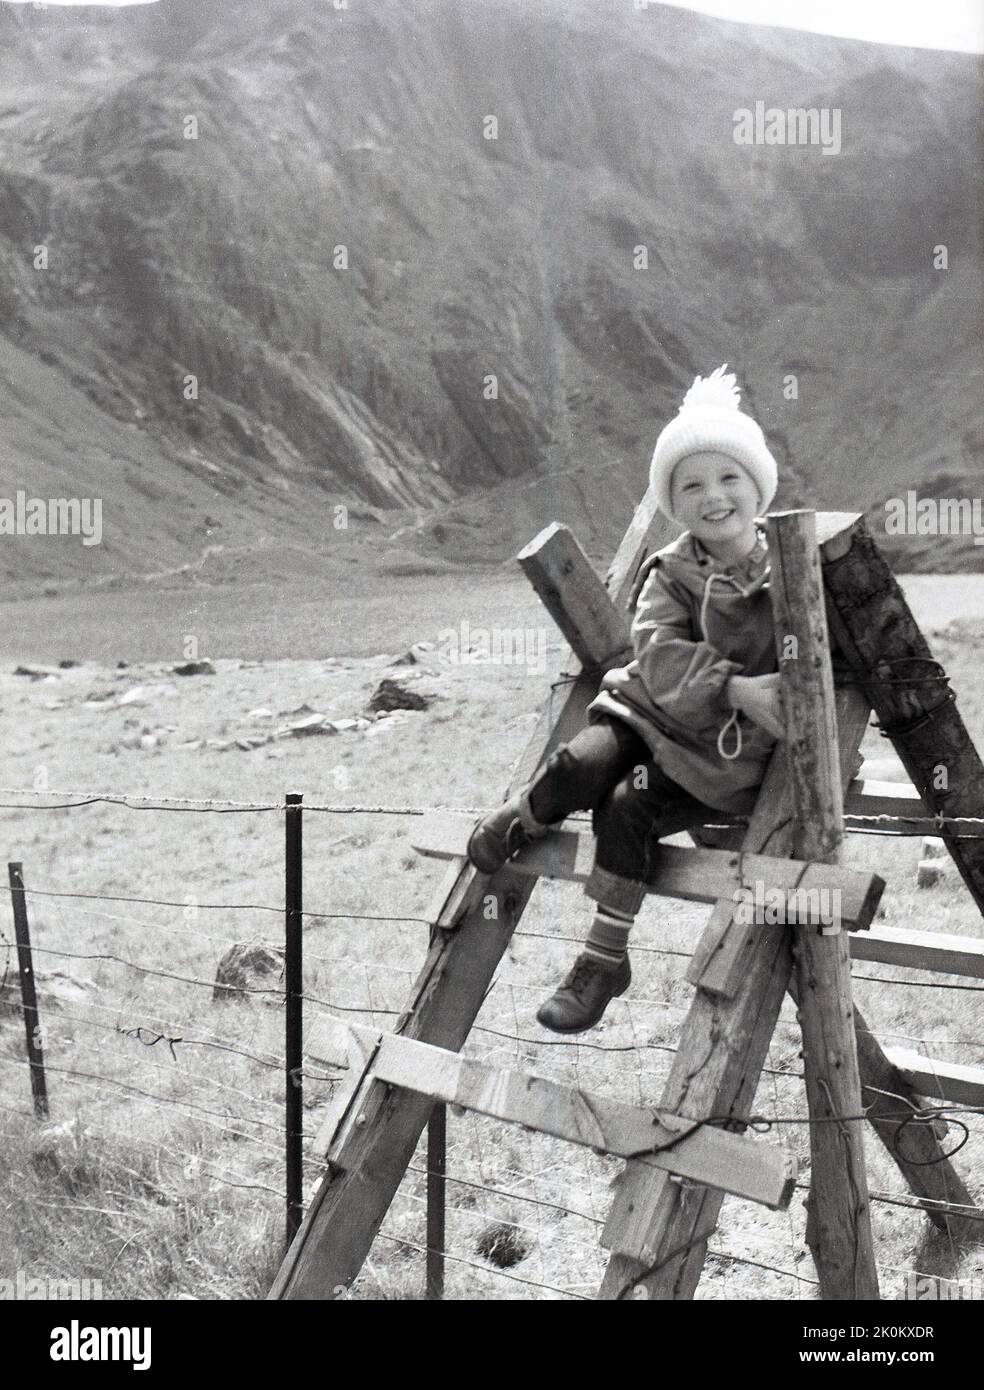 1956, historical, young child on style??Snowdonia, Wales, UK Stock Photo